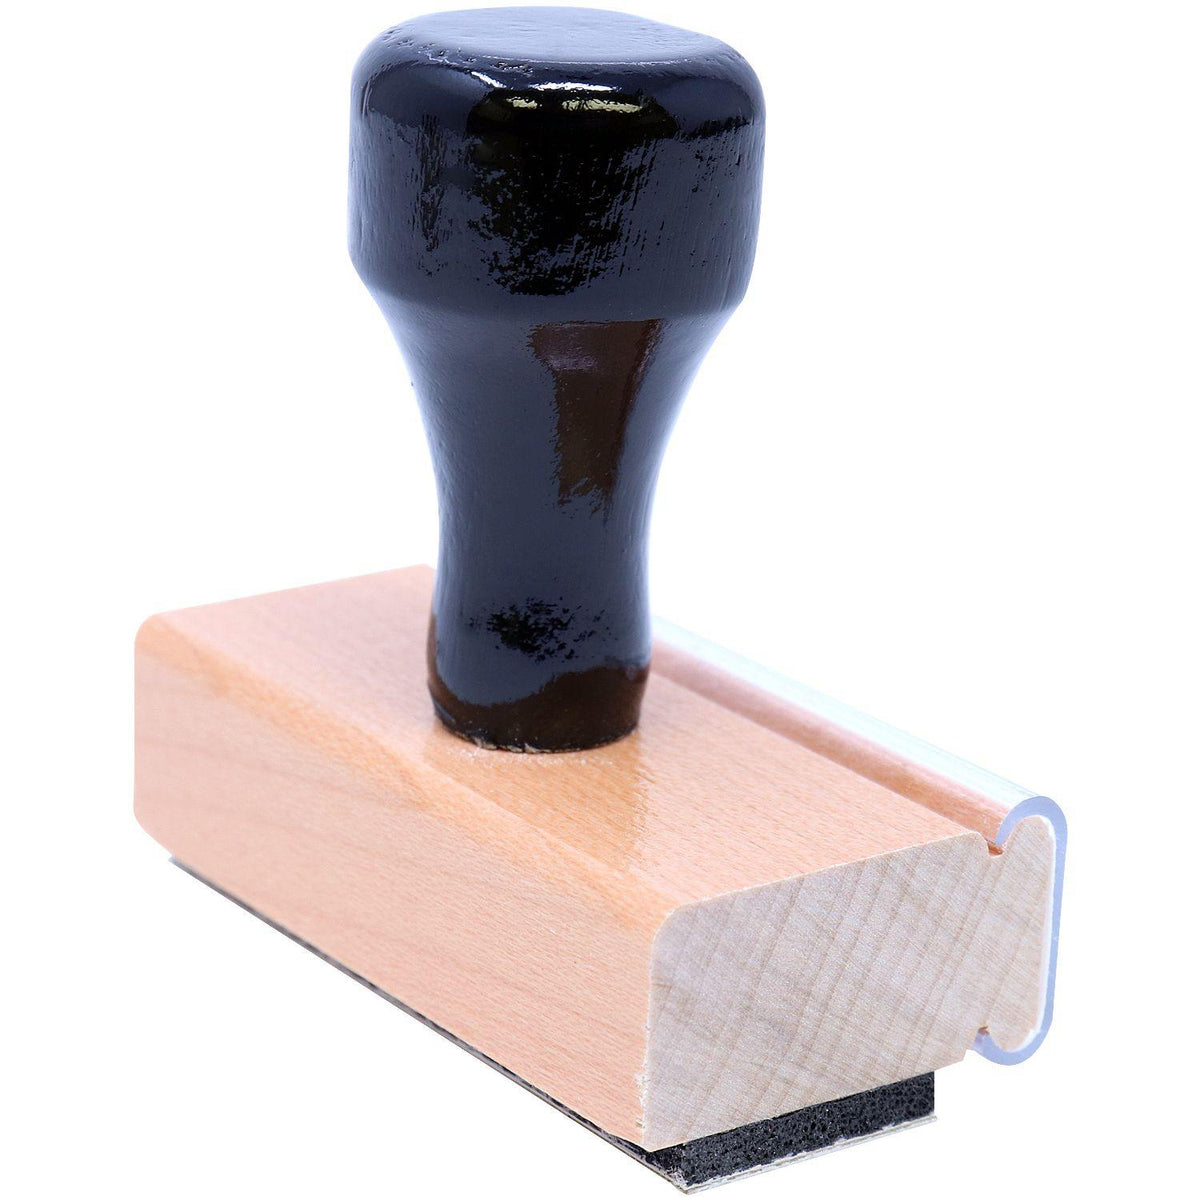 Large Will Rubber Stamp - Engineer Seal Stamps - Brand_Acorn, Impression Size_Large, Stamp Type_Regular Stamp, Type of Use_Legal, Type of Use_Medical Office